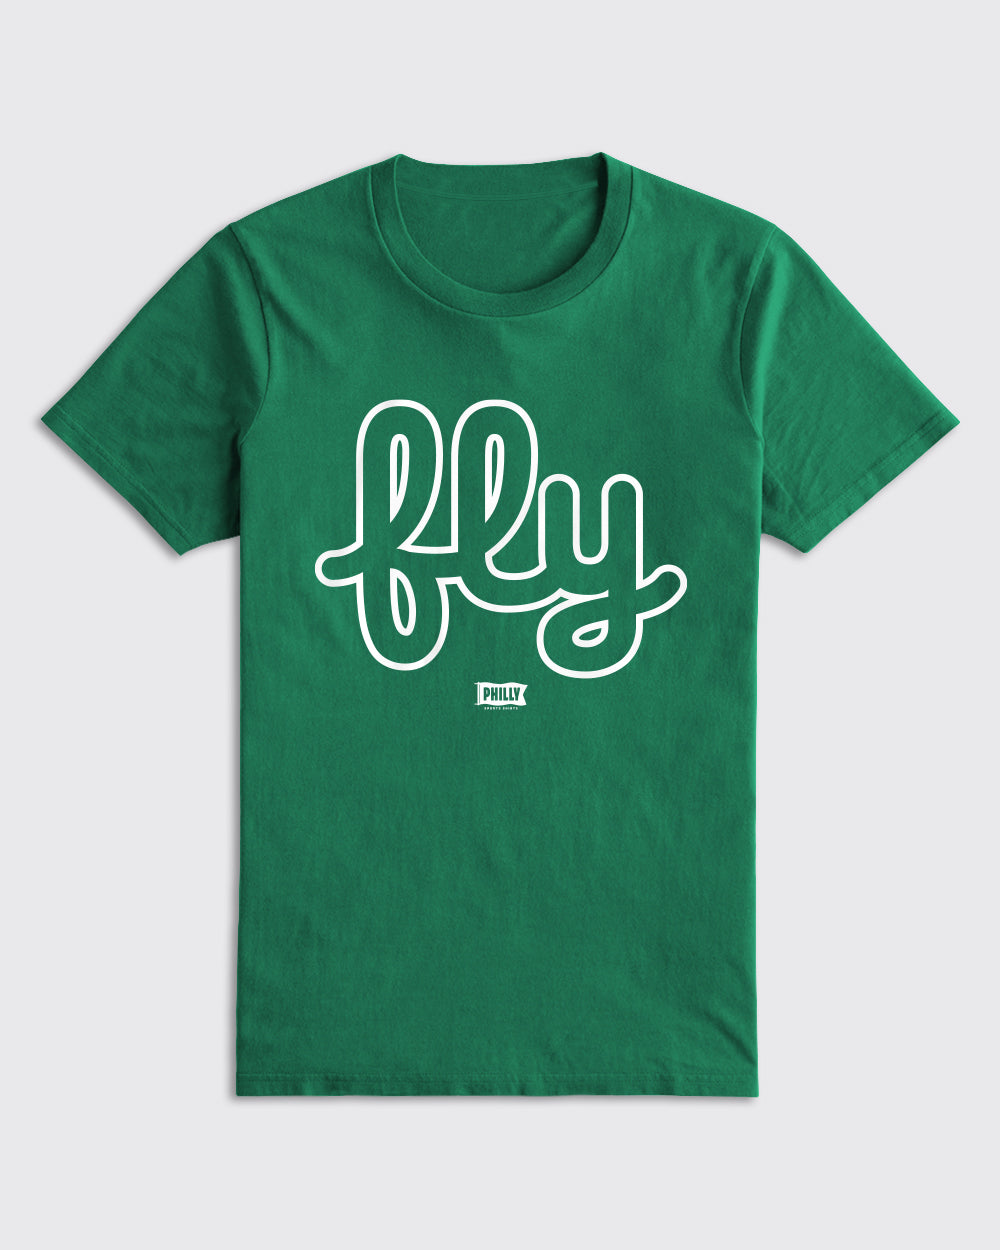 Ultra Fly Script Shirt - Eagles, Limited Edition, T-Shirts - Philly Sports Shirts